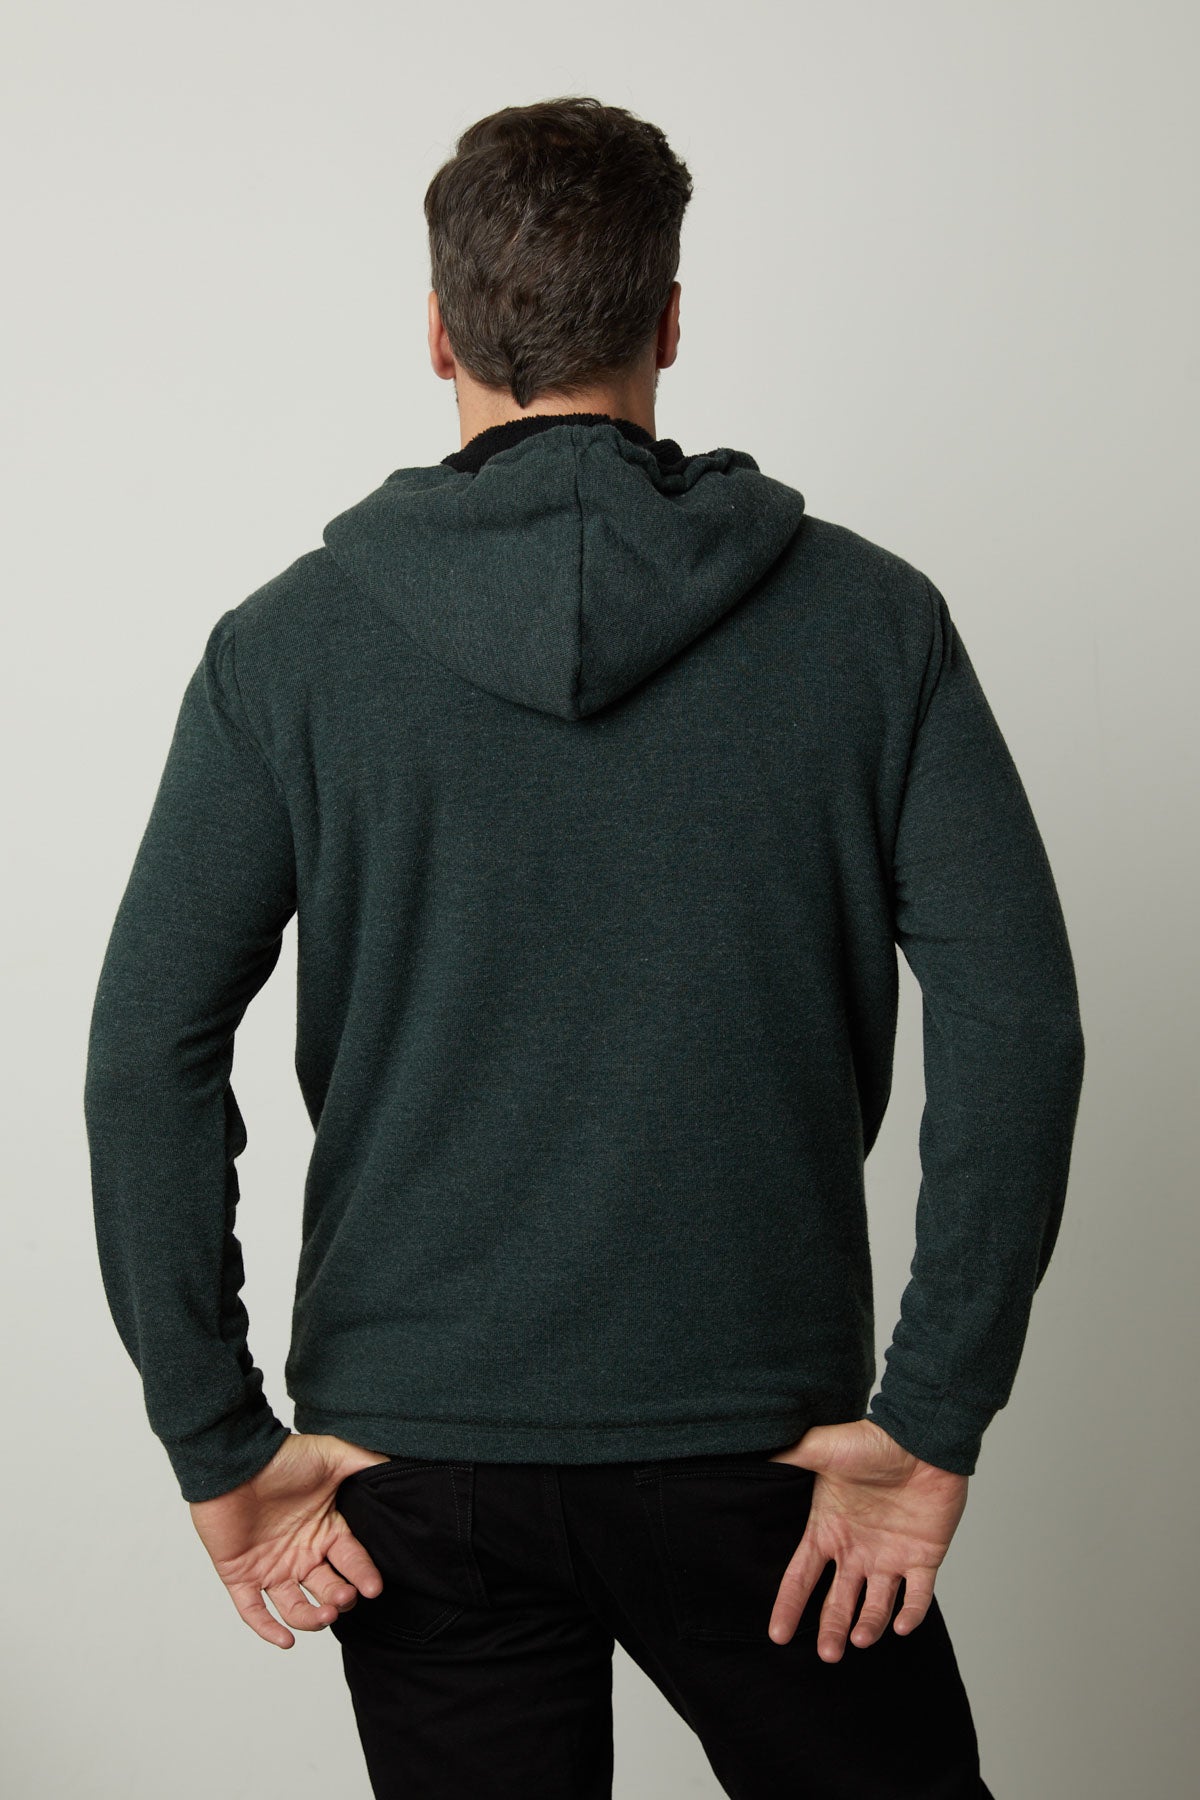 The back view of a man wearing Velvet by Graham & Spencer's SALVADORE SHERPA LINED HOODIE with an adjustable drawstring hood.-35605834137793